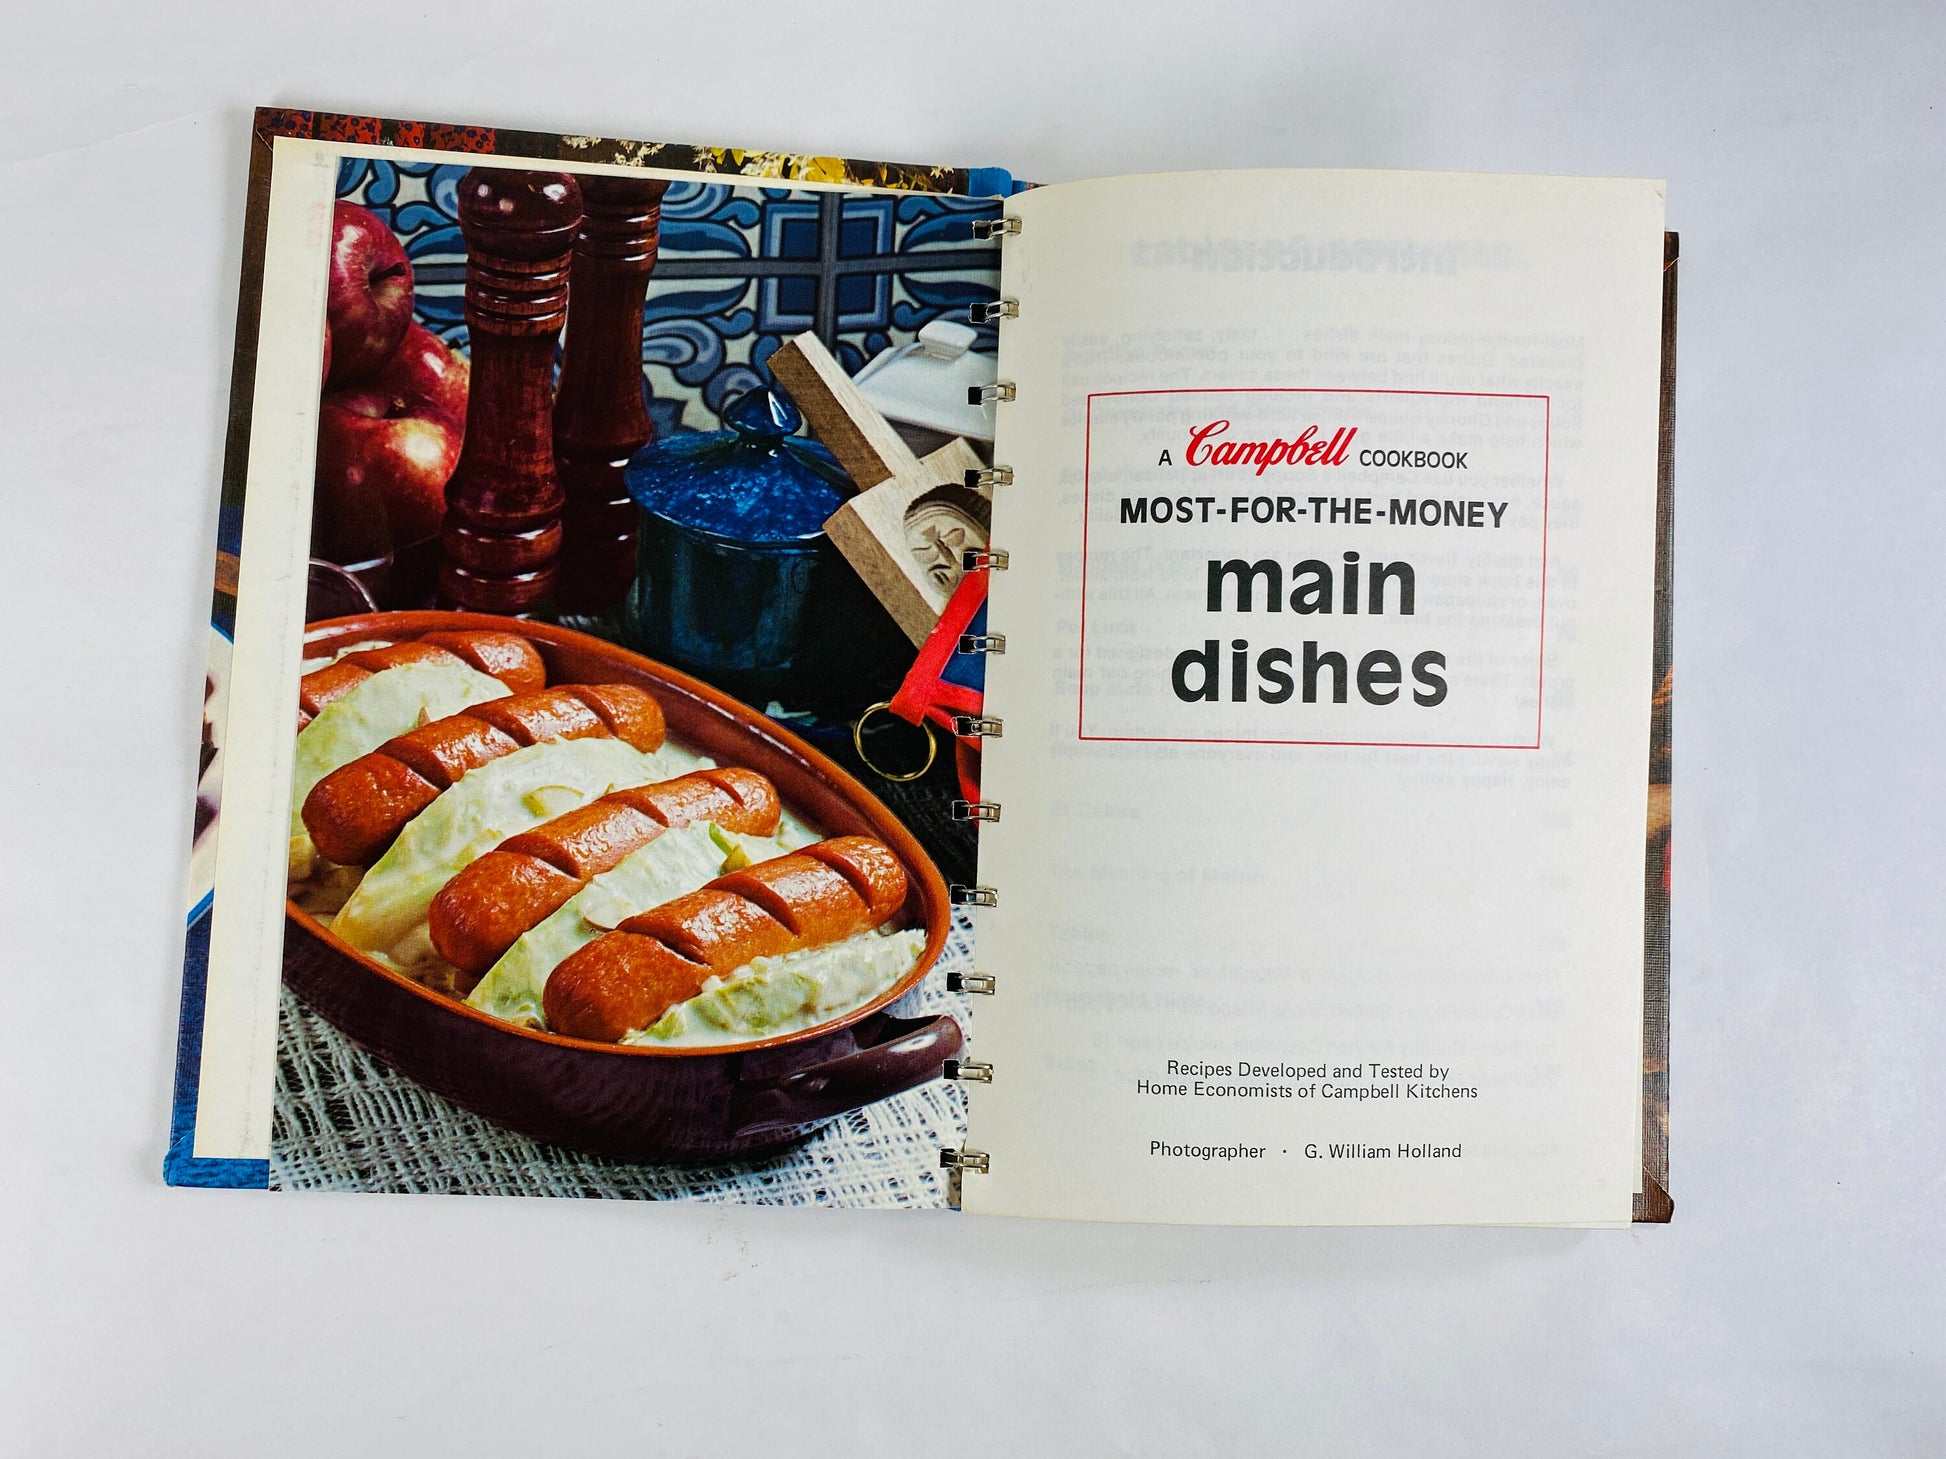 Campbell's Cookbook Most for the Moeny Main Dishes Cooking with Soup. Blue retro cookbook circa 1975 Book lover gift. Andy Warhol